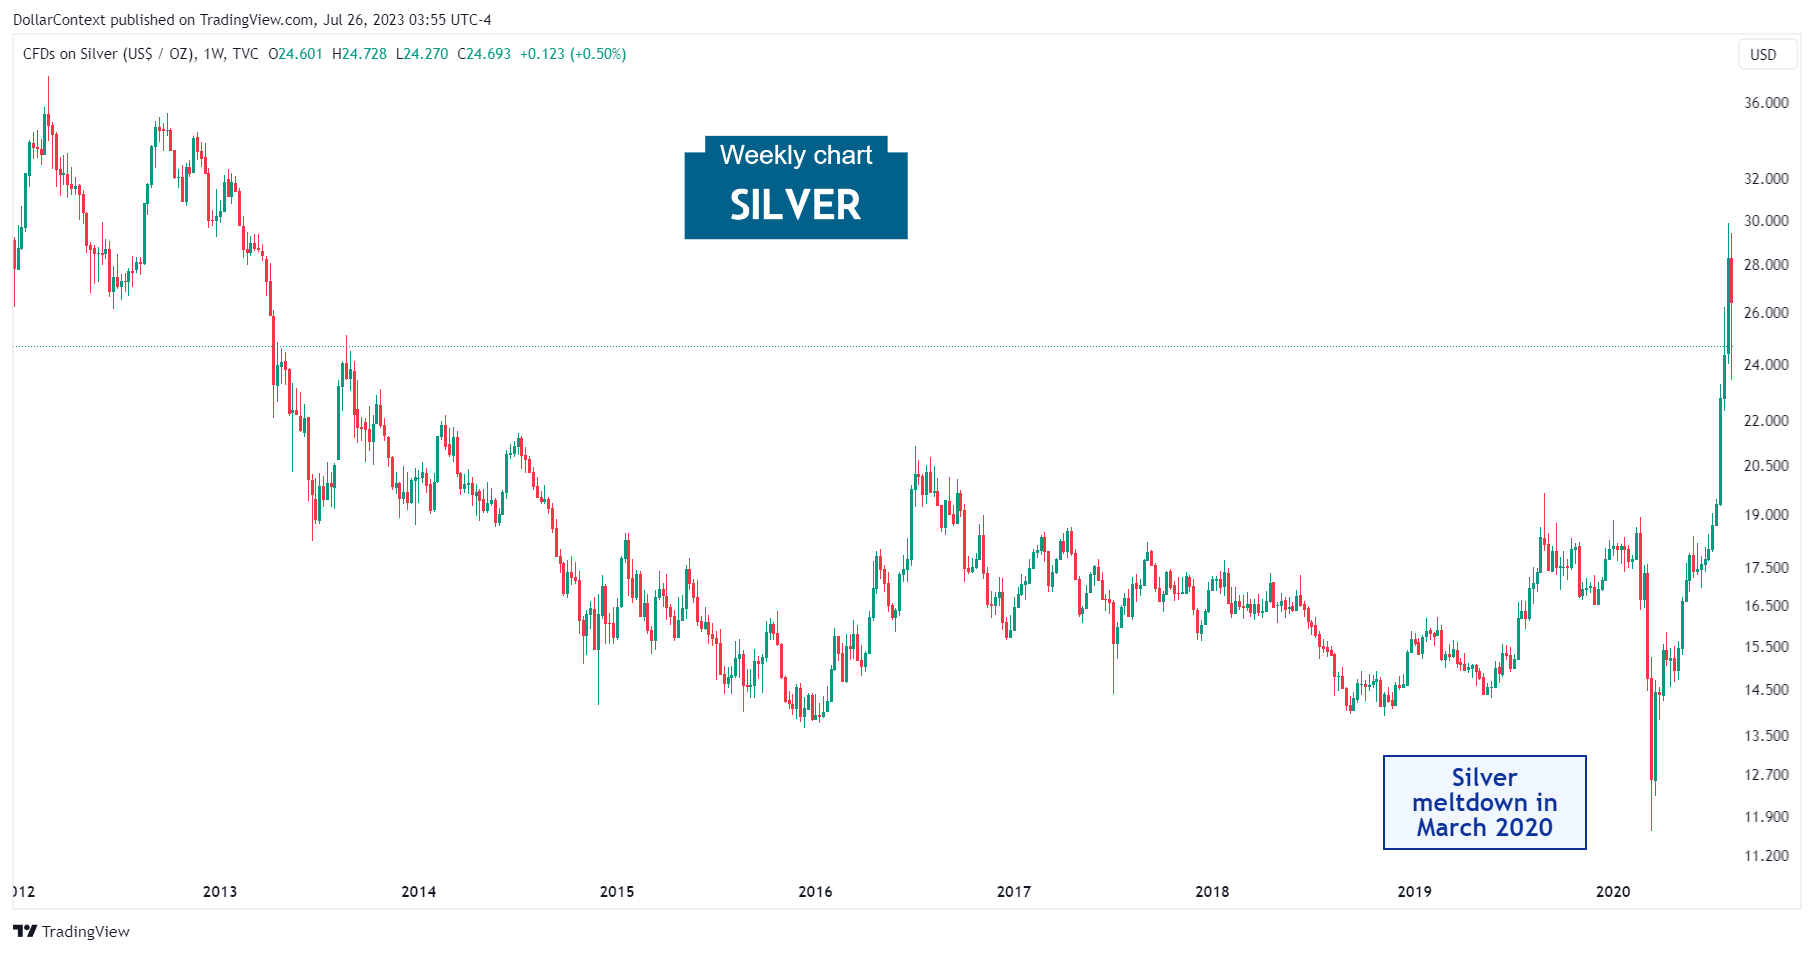 The Meltdown of Silver Prices in March 2020